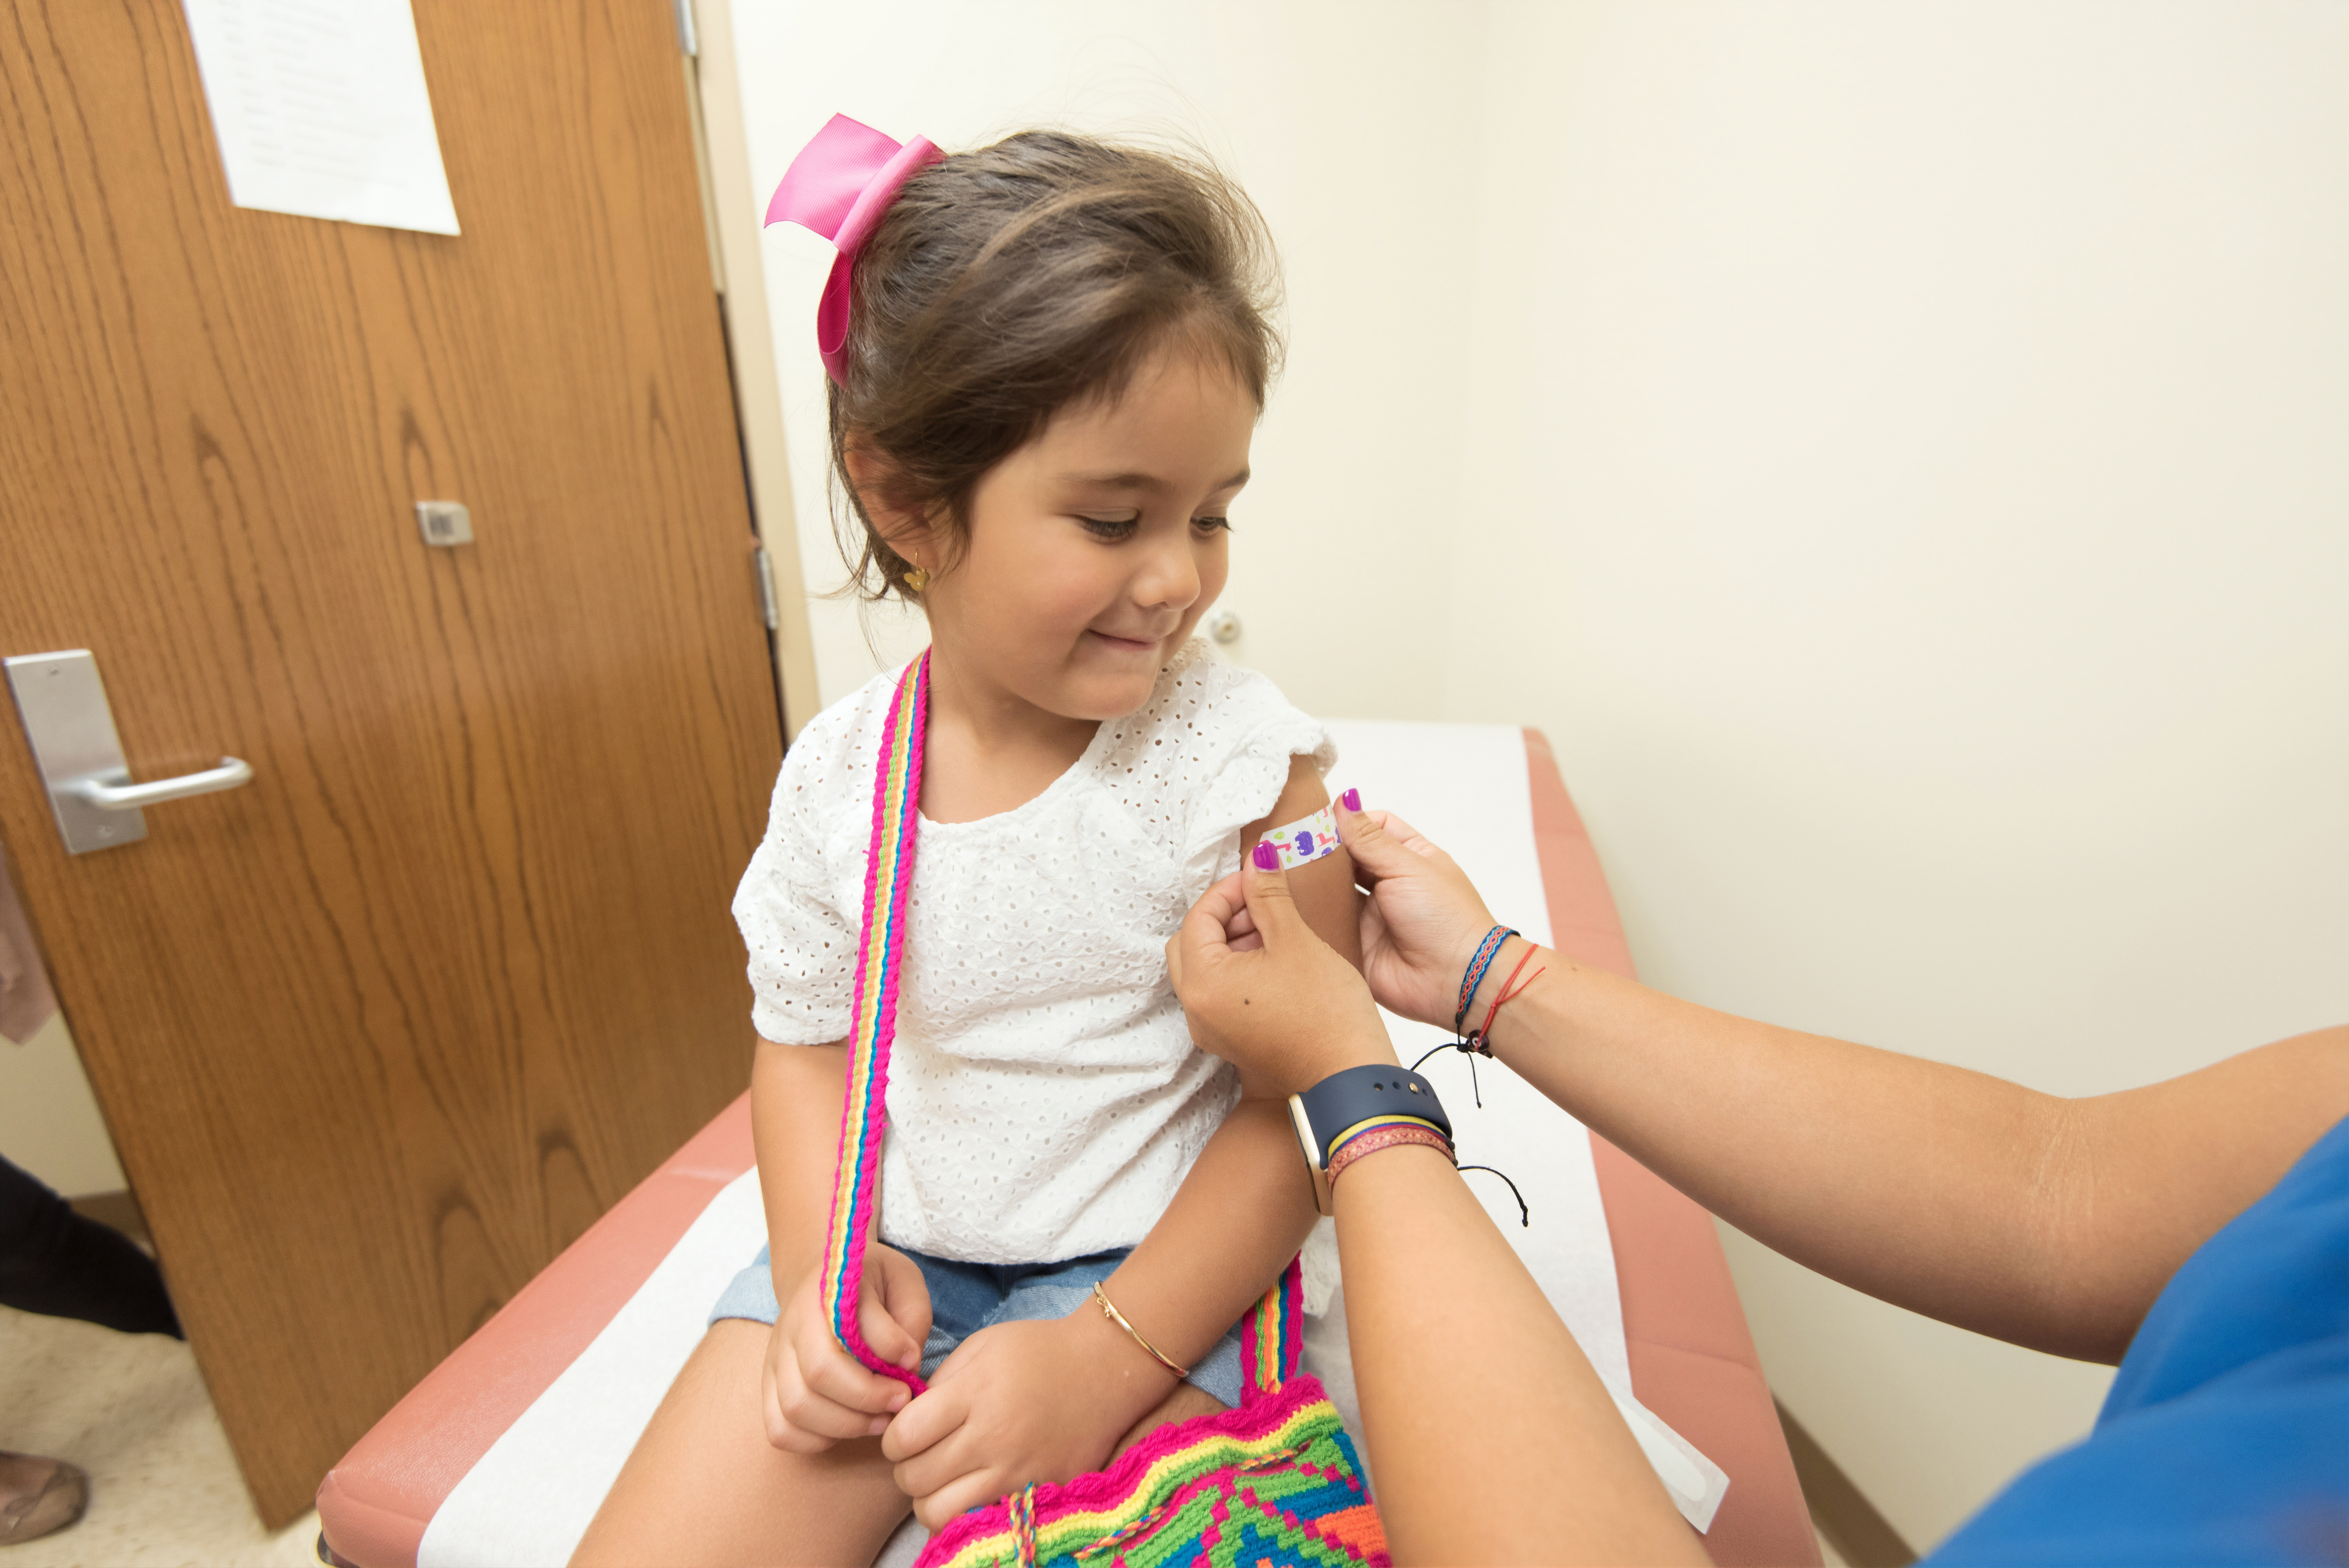 In this 2017 photo, captured inside a clinical setting, a health care provider was placing a bandage on the injection site of a child, who had just received a seasonal influenza vaccine. Children younger than 5-years-old, and especially those younger than 2-years-old, are at high risk of developing serious flu-related complications. A flu vaccine offers the best defense against flu, and its potentially serious consequences, and can also reduce the spread of flu to others.